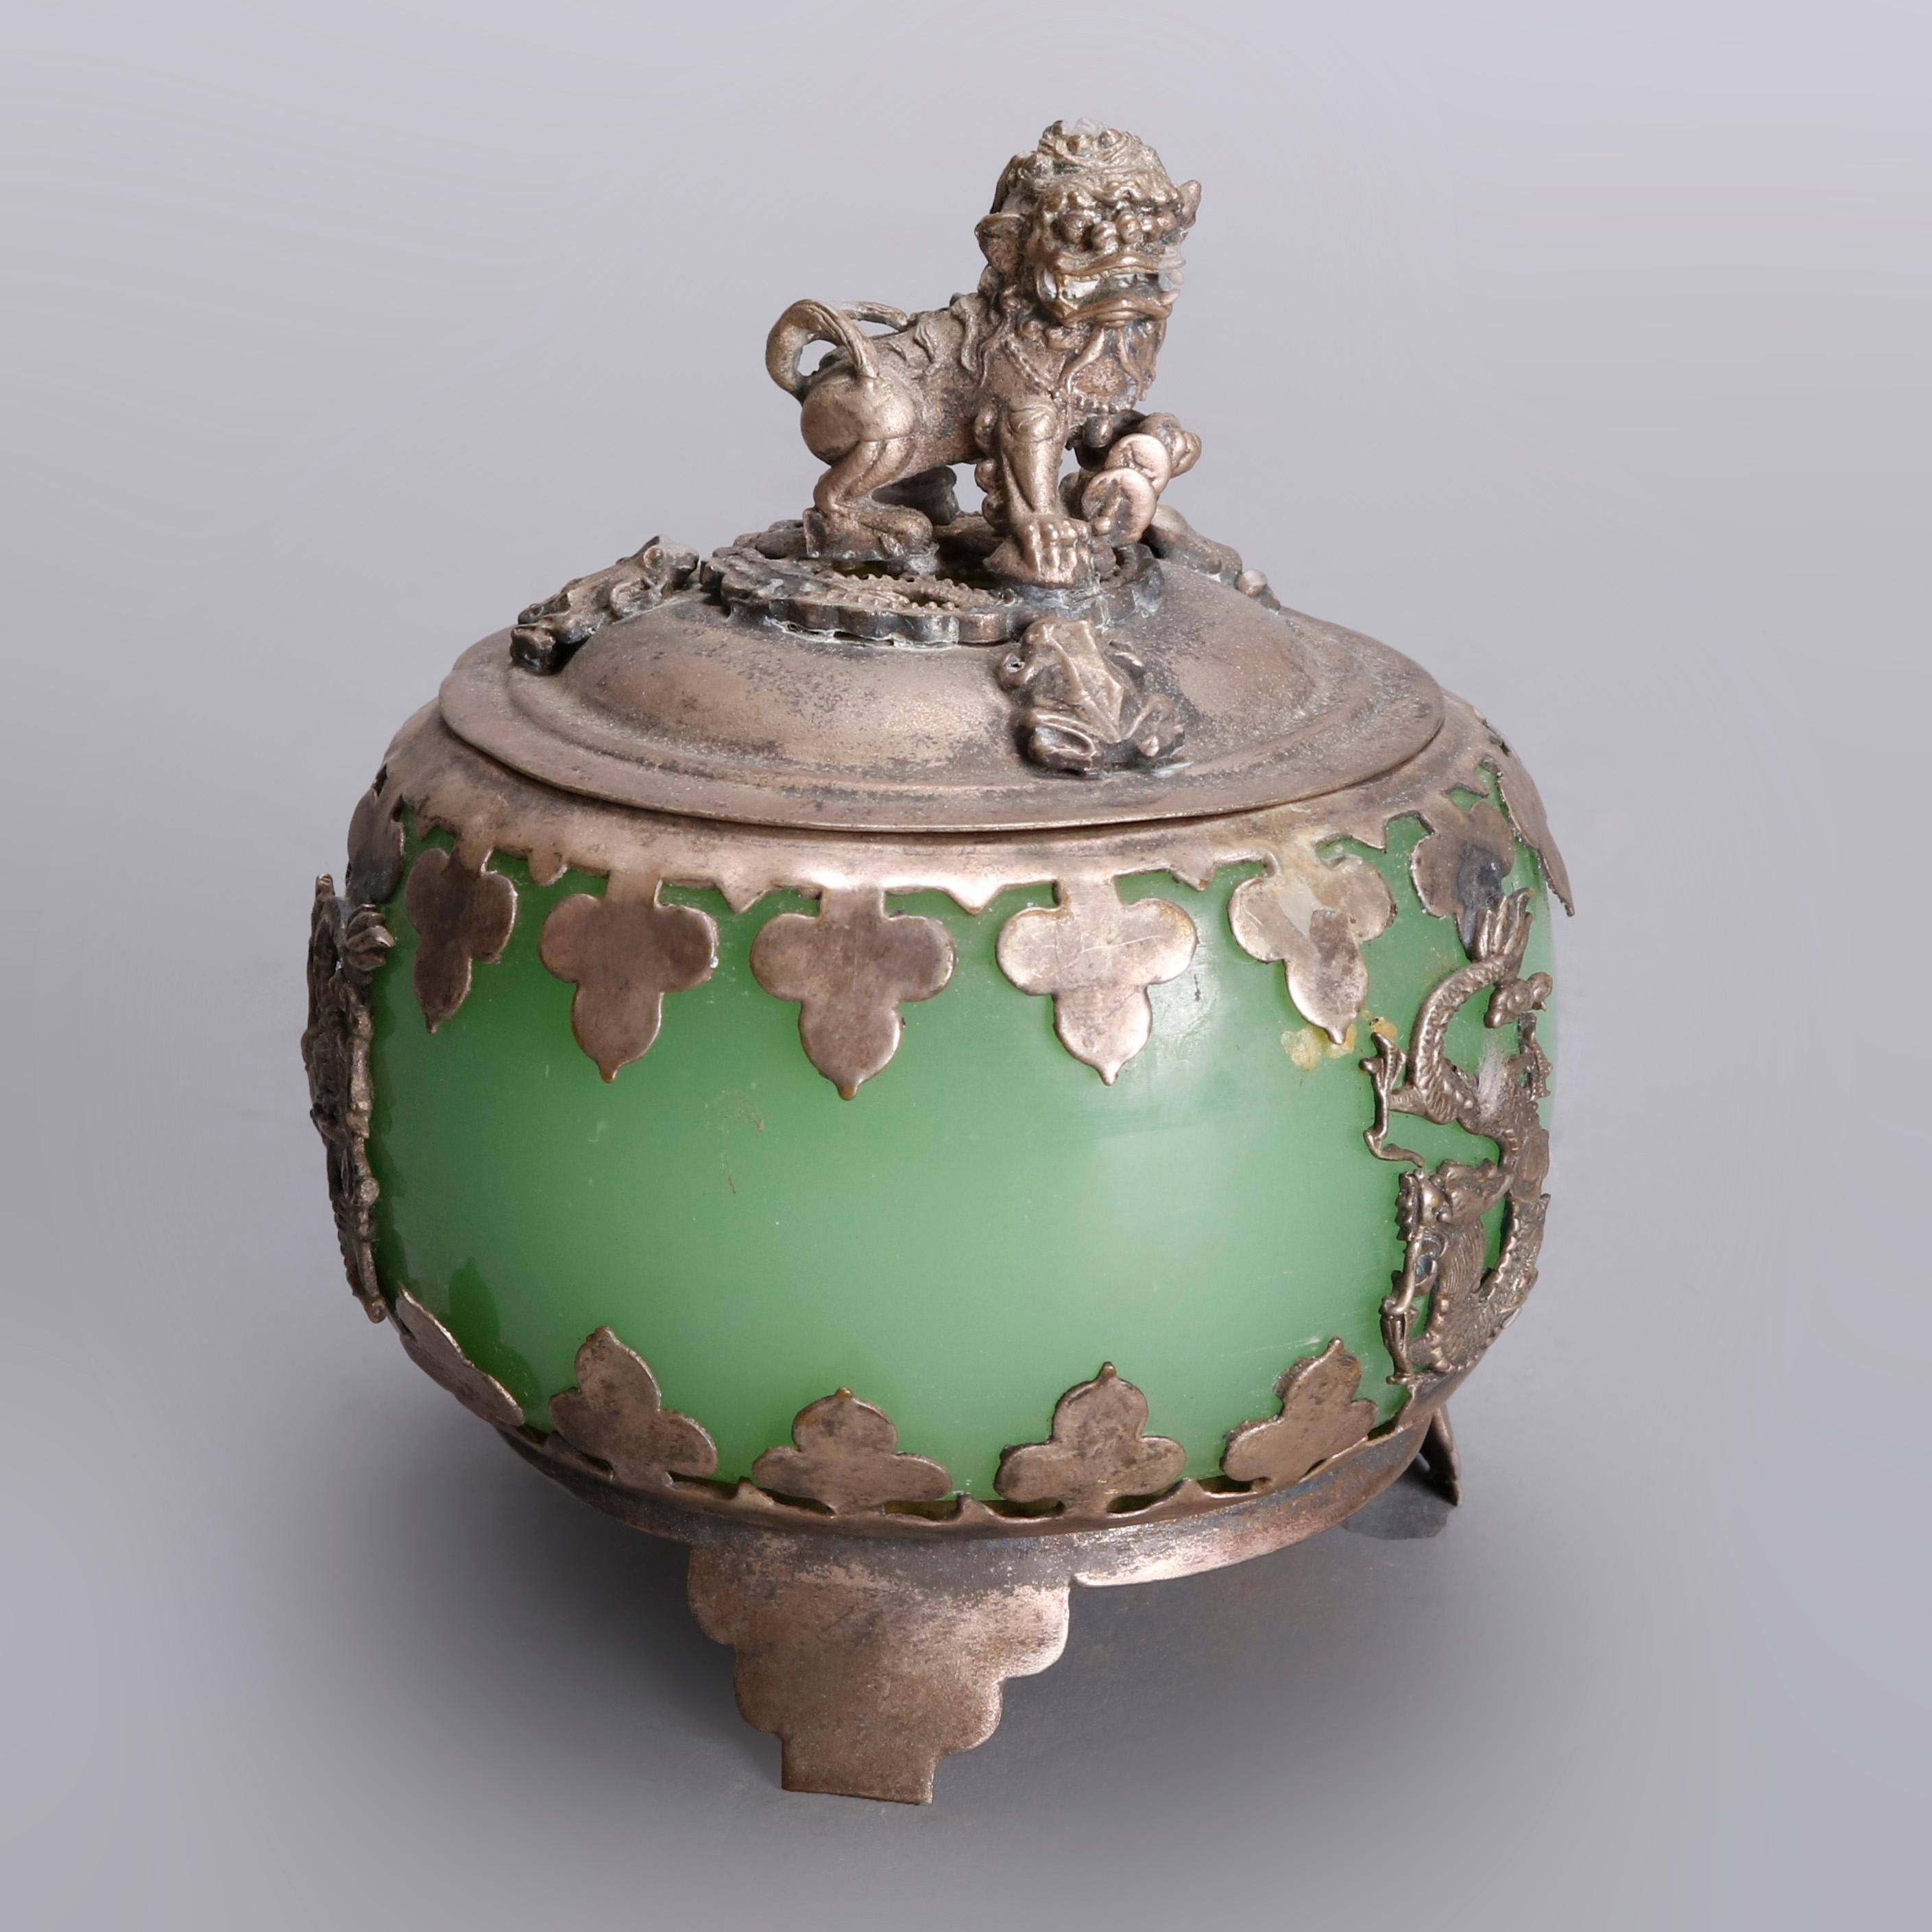 Cloissoné Asian Figural Jade, Cloisonné and Silver Teapots and Covered Jar, 20th Century